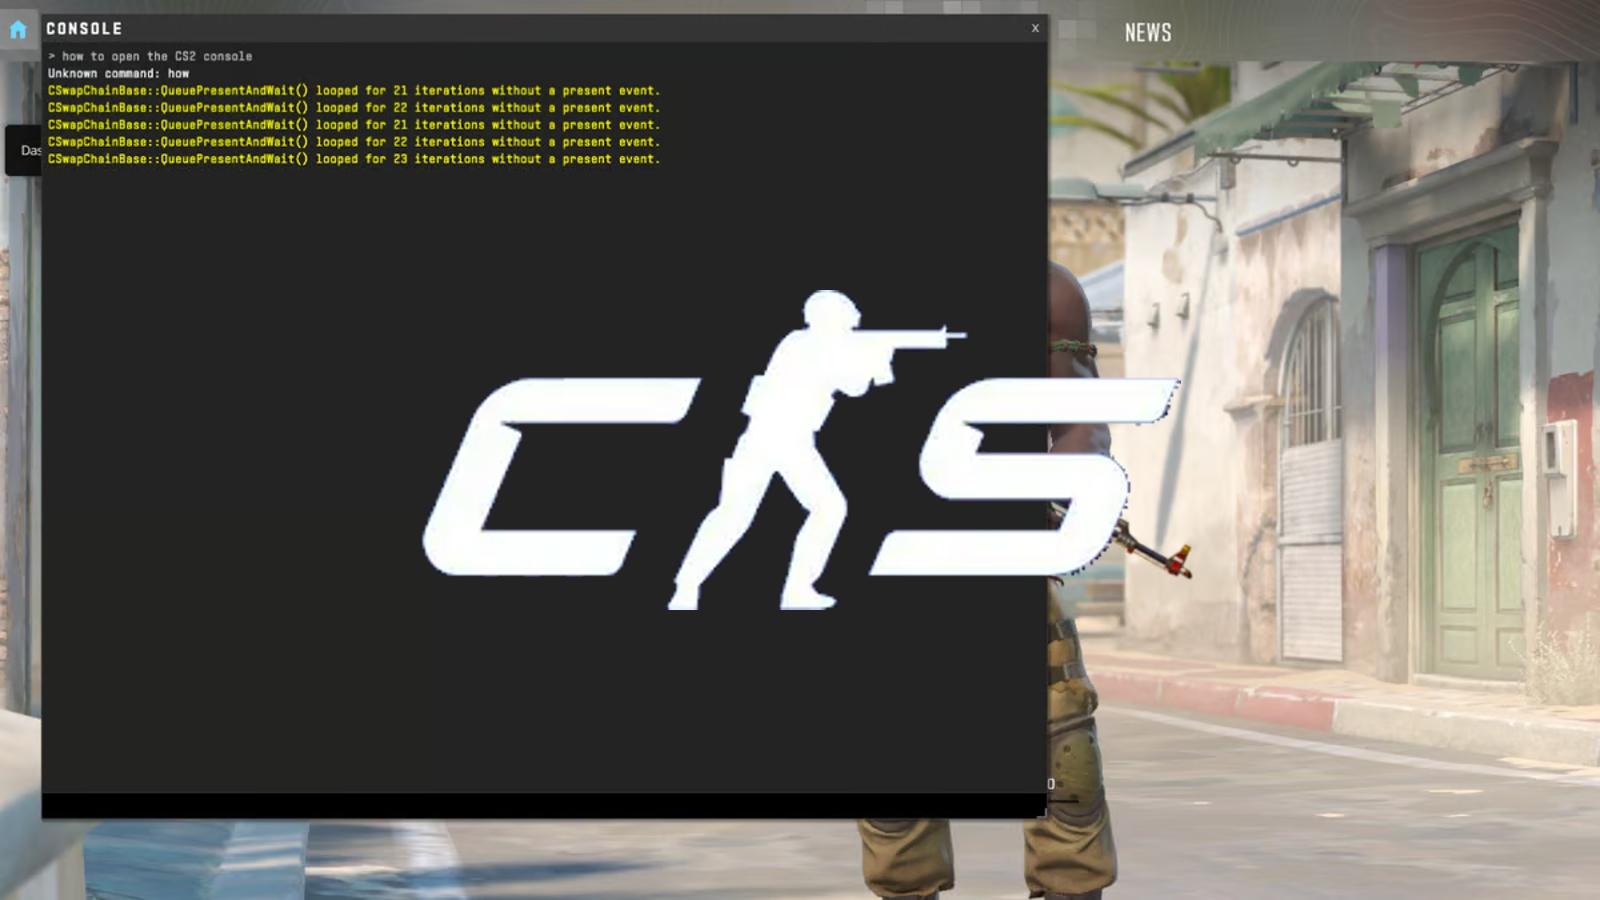 CS2 Freezes upon reconnecting, CS2 freezes if there's been too much  something in one match · Issue #3306 · ValveSoftware/csgo-osx-linux ·  GitHub